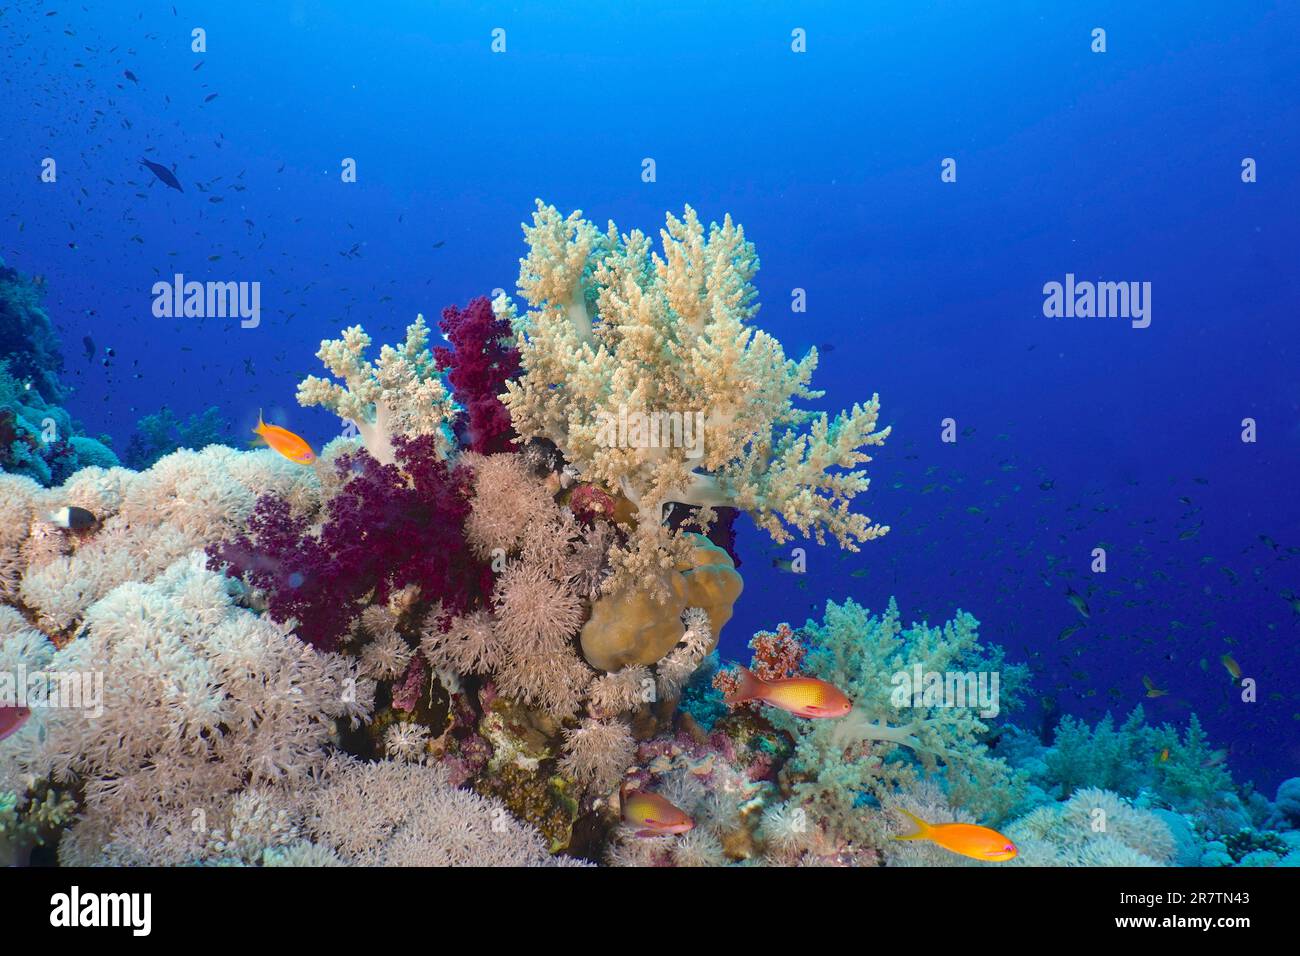 Broccoli tree and other soft corals (Litophyton arboreum), typical of the Red Sea. Dive site Elphinstone Reef, Egypt, Red Sea Stock Photo